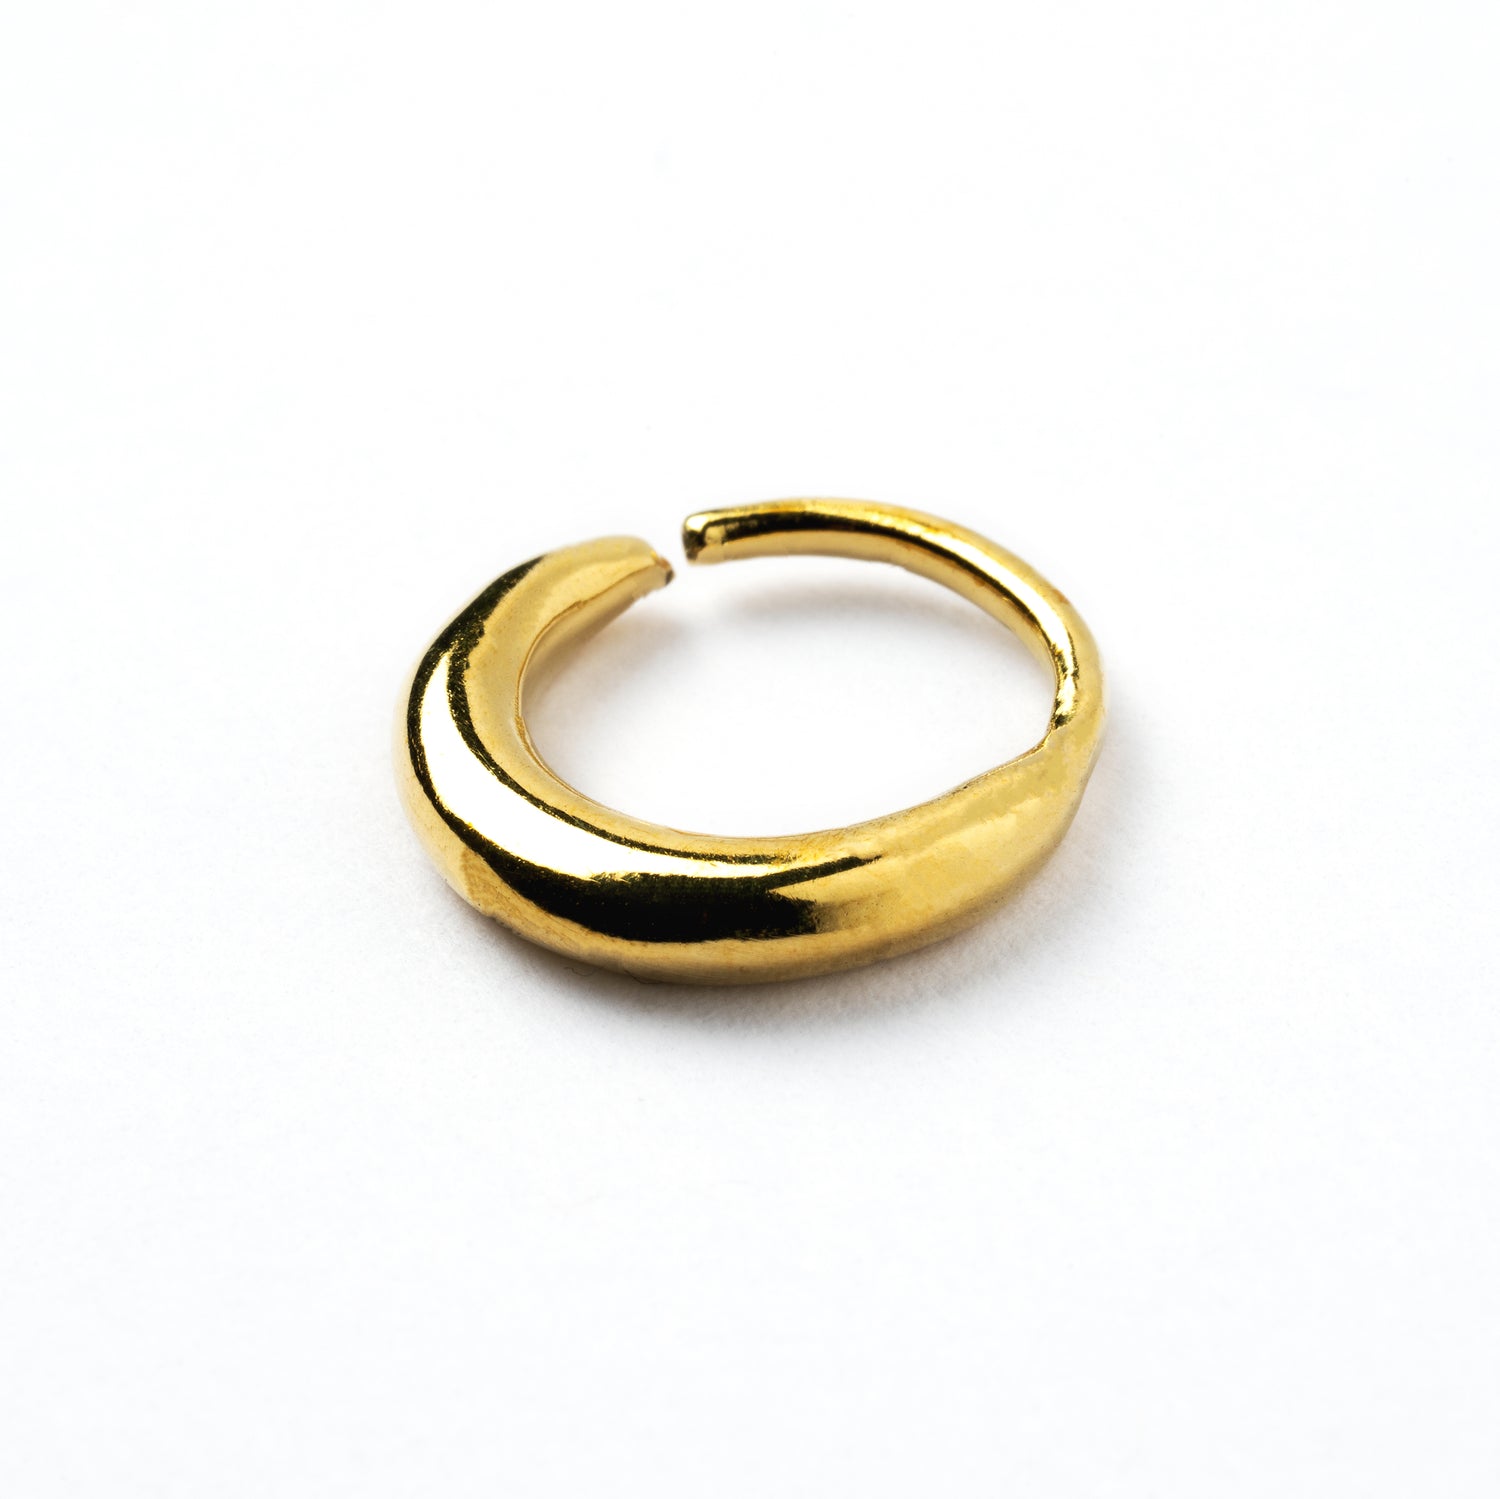 golden brass Rajasthan septum ring right side view